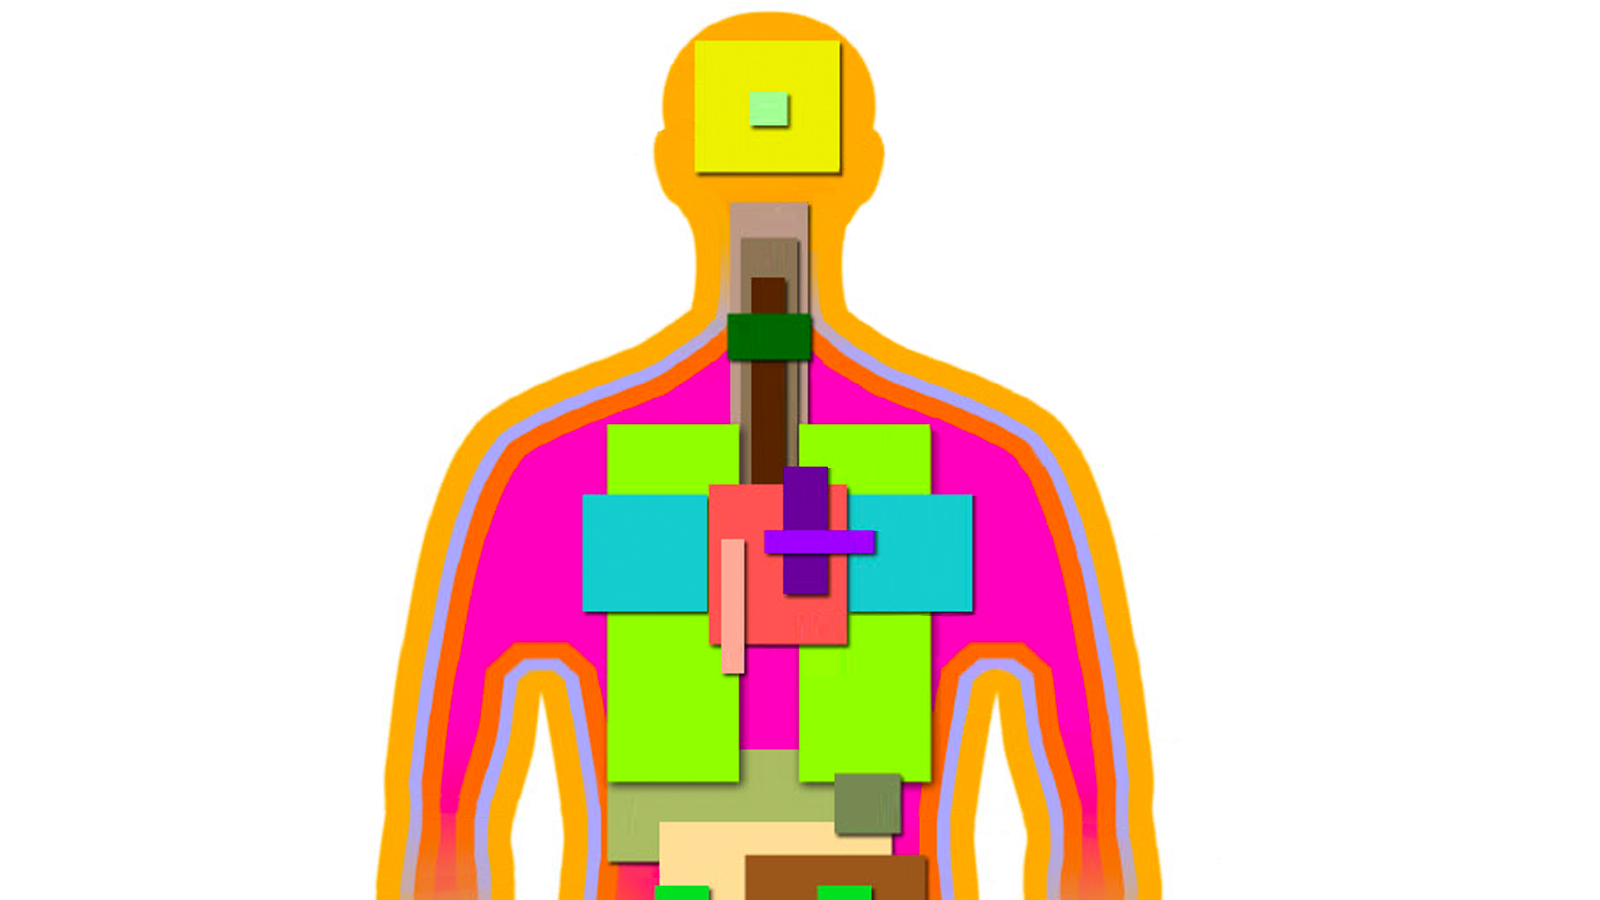 Schematic image of human body and tissue types